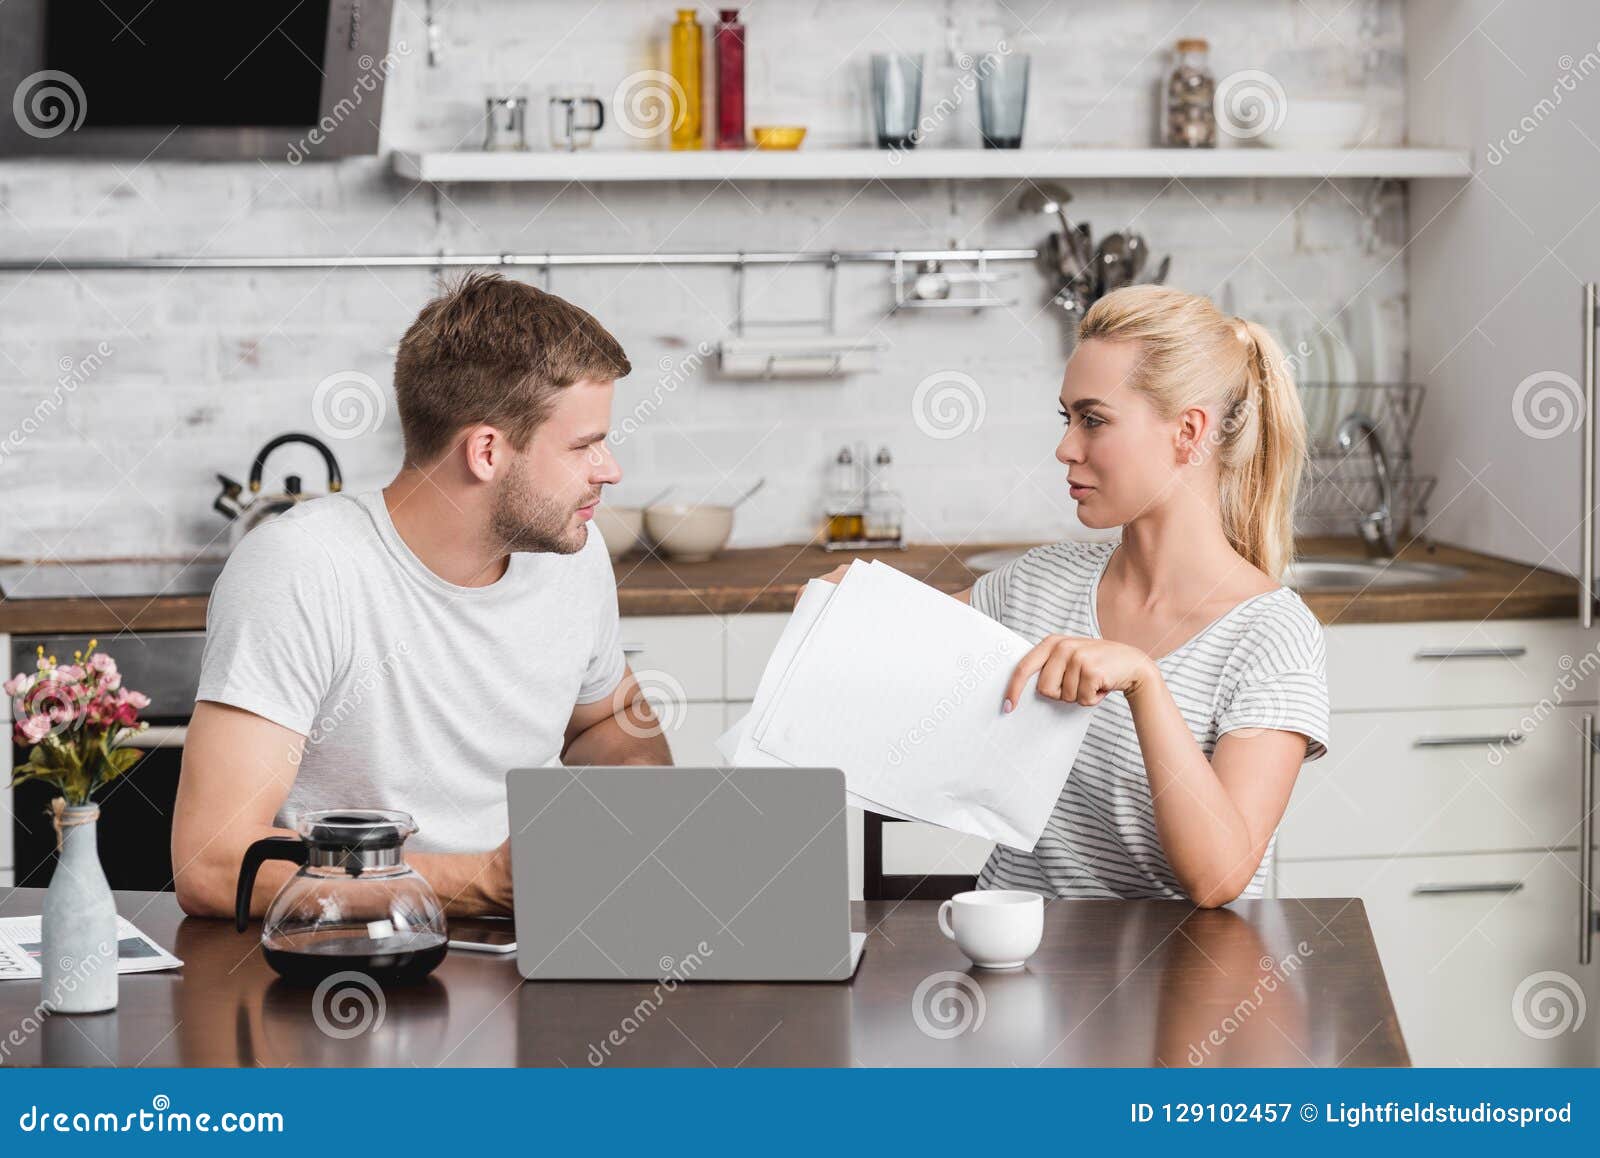 young couple holding papers and using laptop while sitting at kitchen table and looking